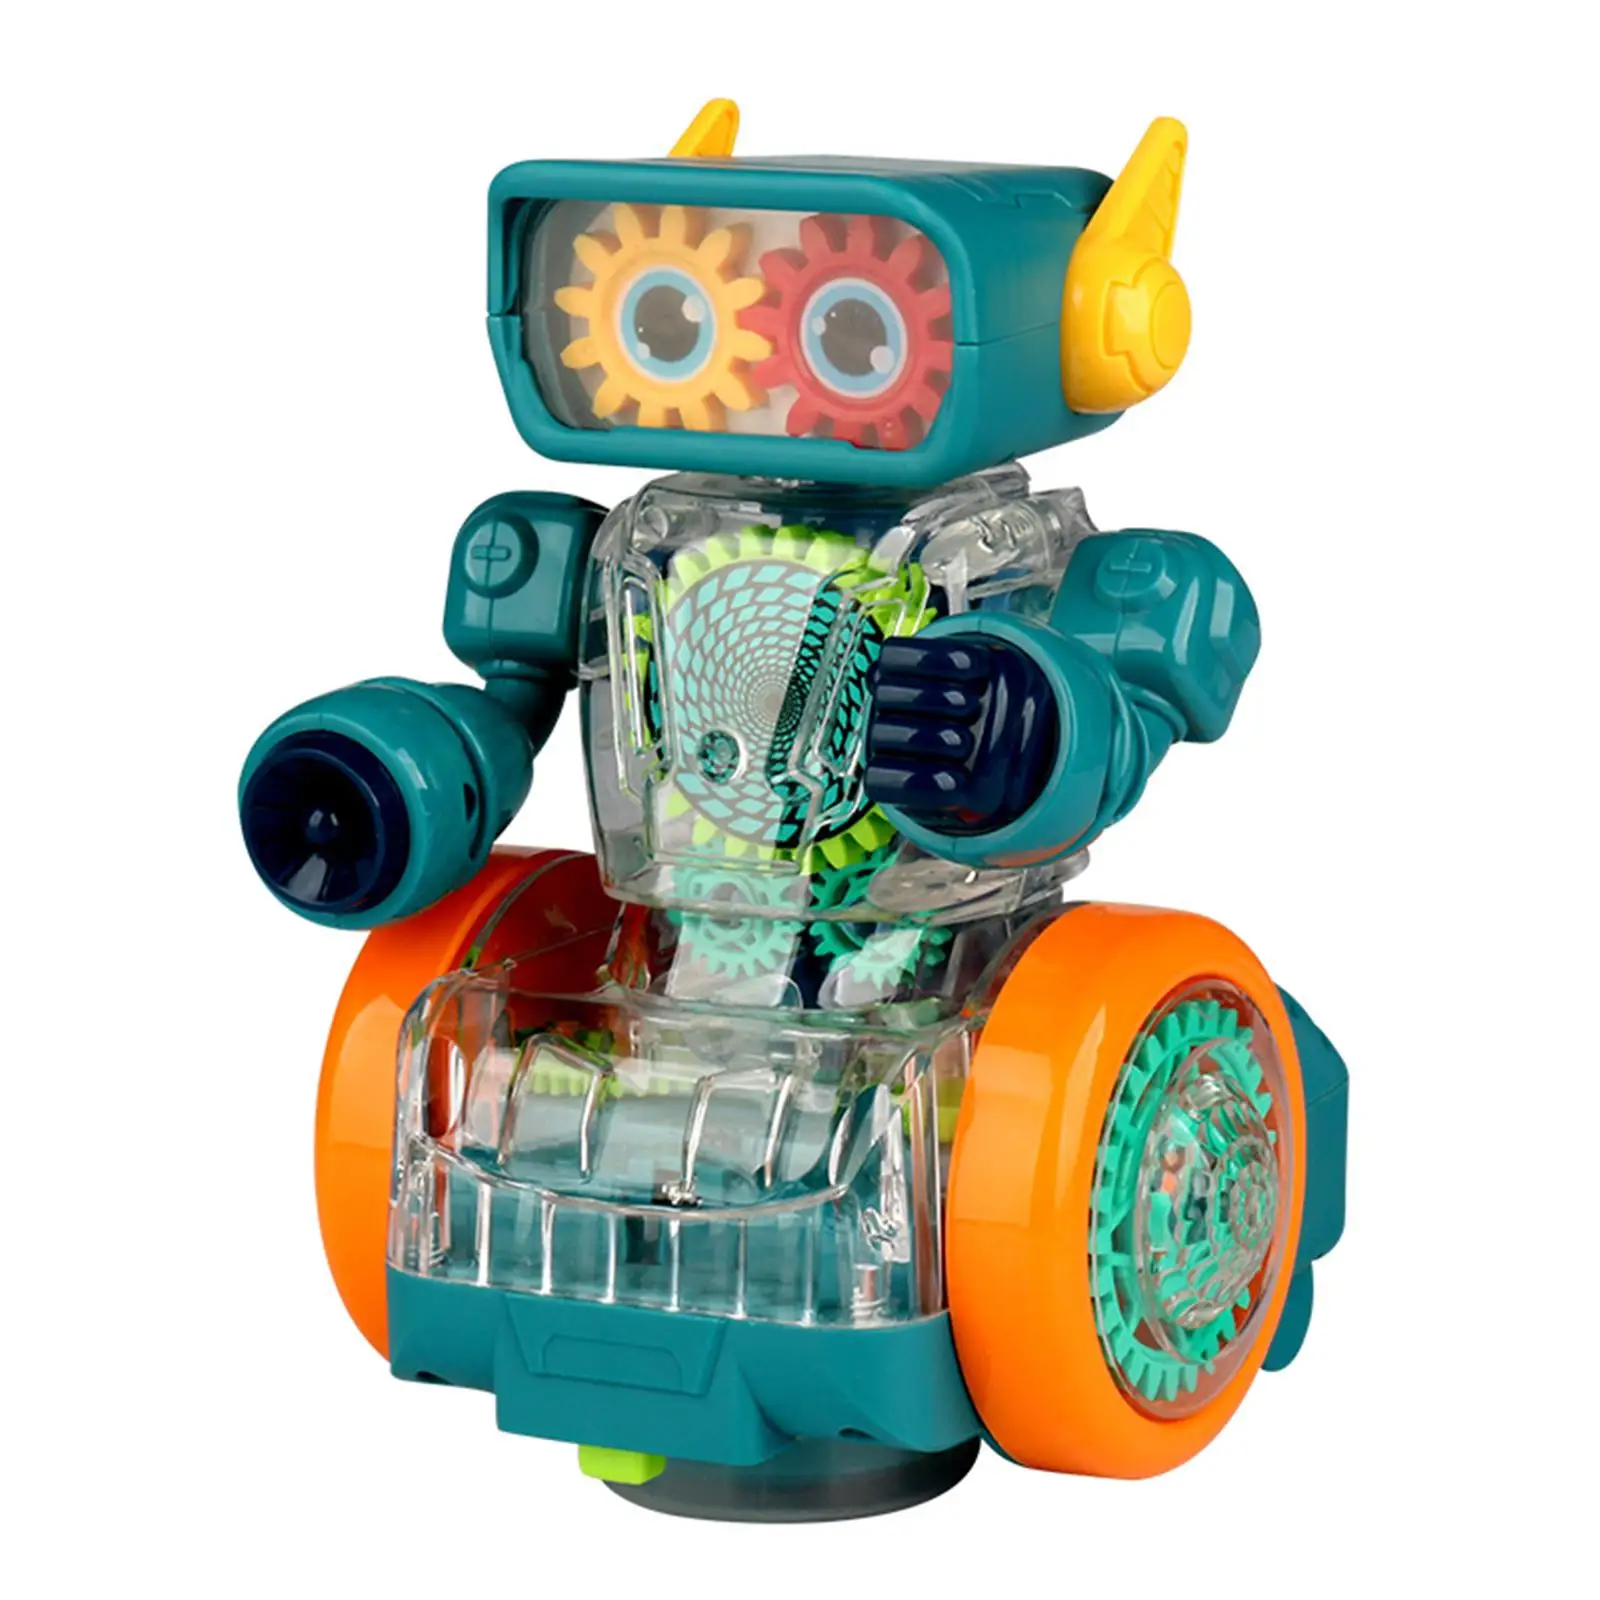 Mechanical Gear Robot Toy with Lighting with Moving Gears for Holiday Gifts